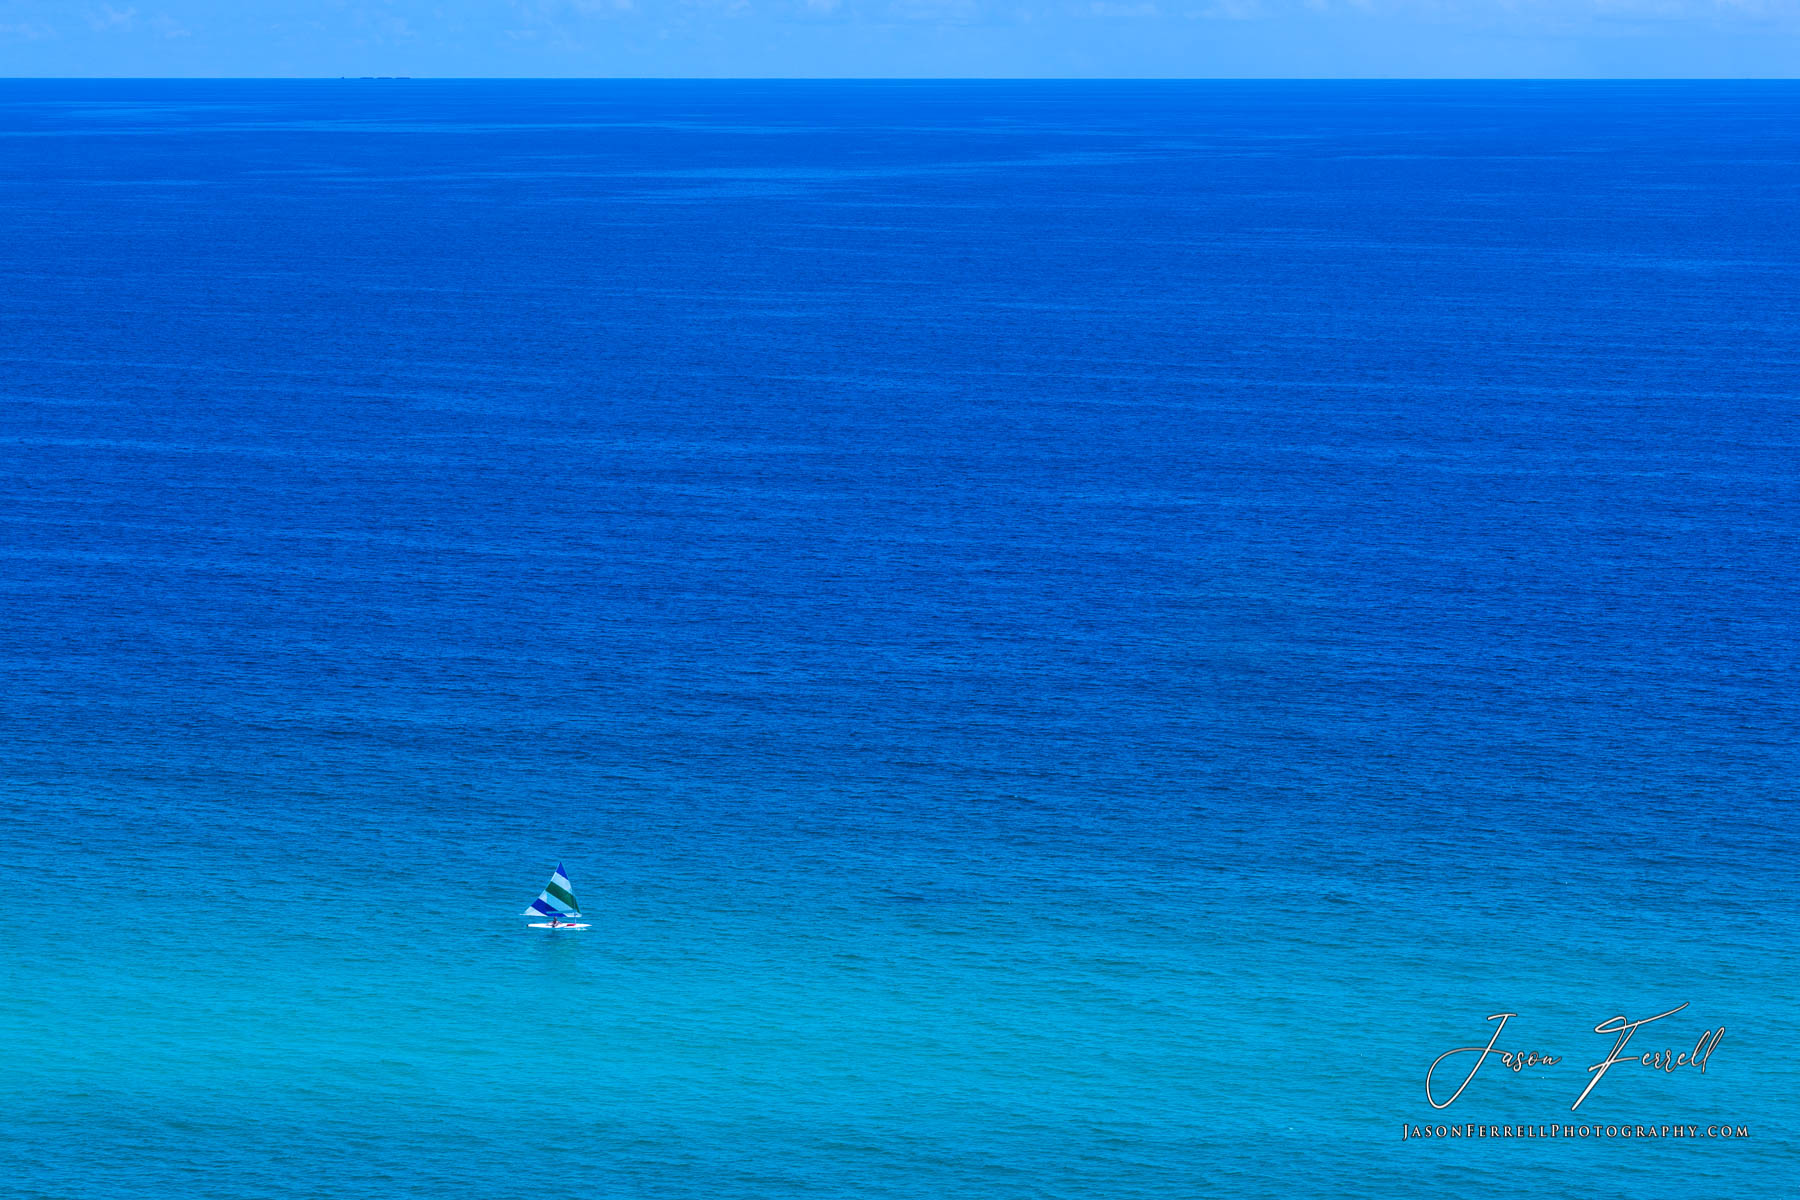 The vast open waters of the Gulf of Mexico with a single person on a sailboat.